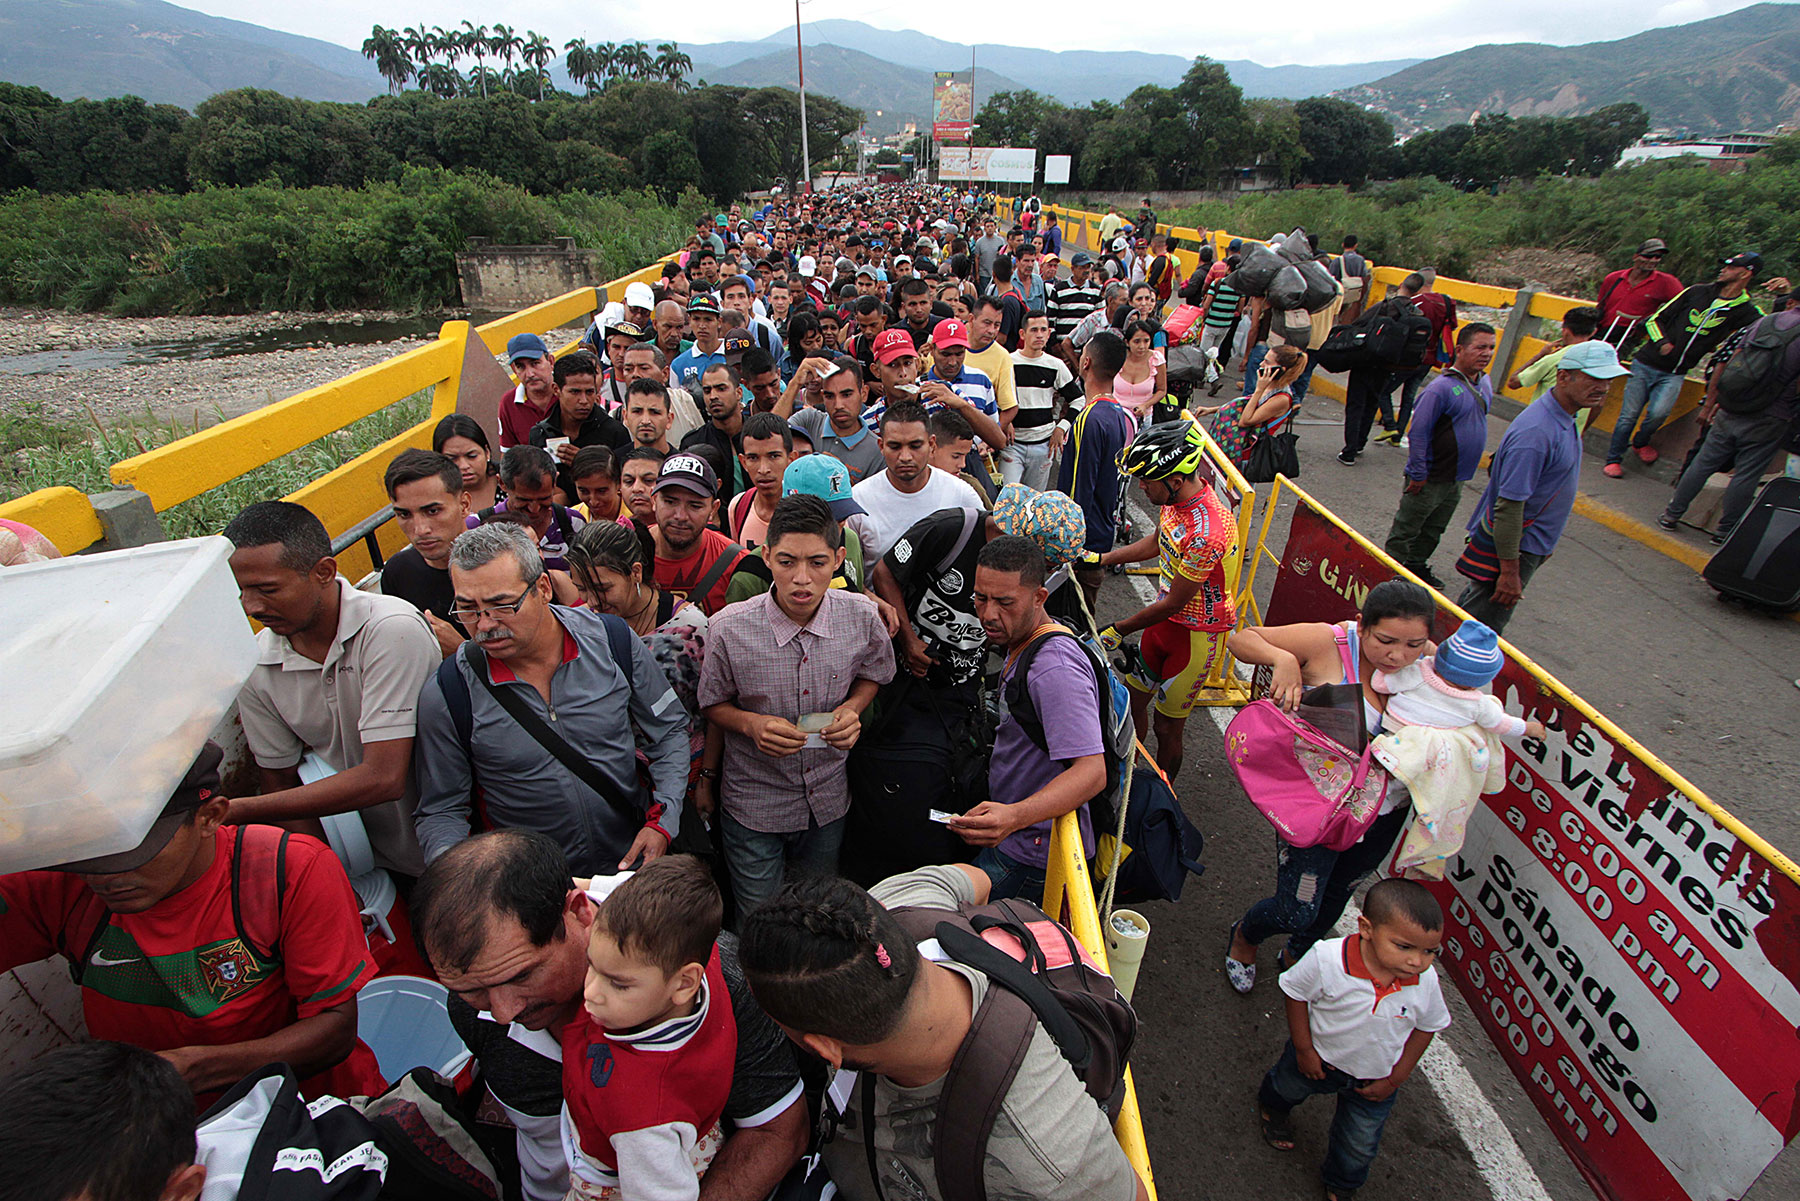 US$1.35 Billion Needed to Help Venezuelan Refugees in Latin America and the Caribbean